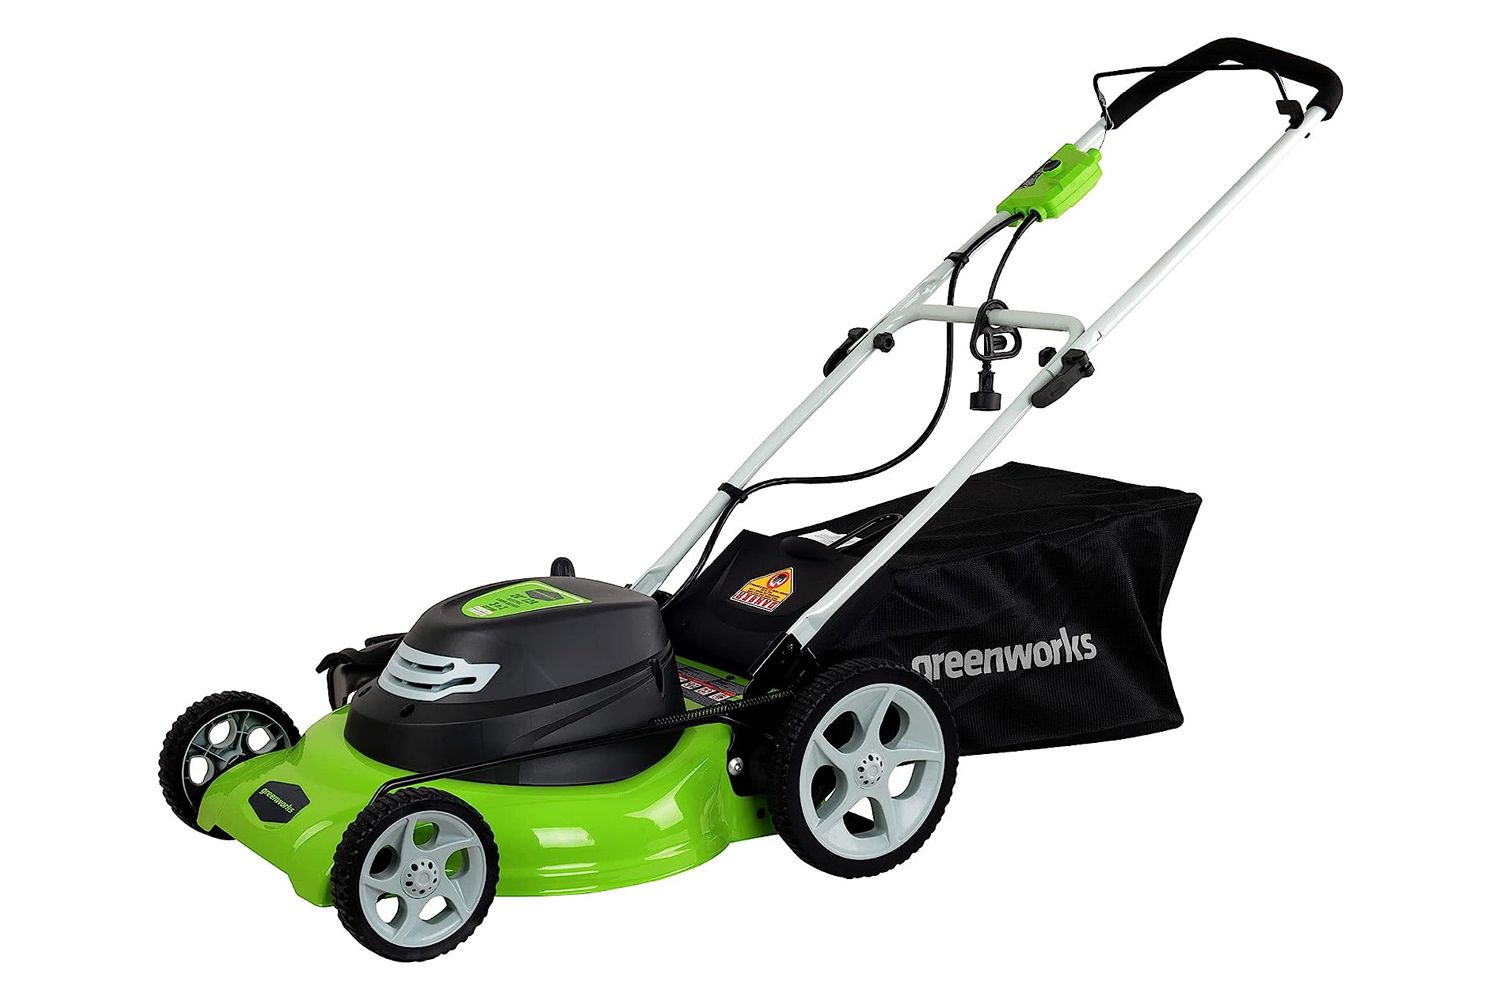 Amazon Greenworks 25022 12-Amp 20-Inch 3-in-1 Corded Lawn Mower